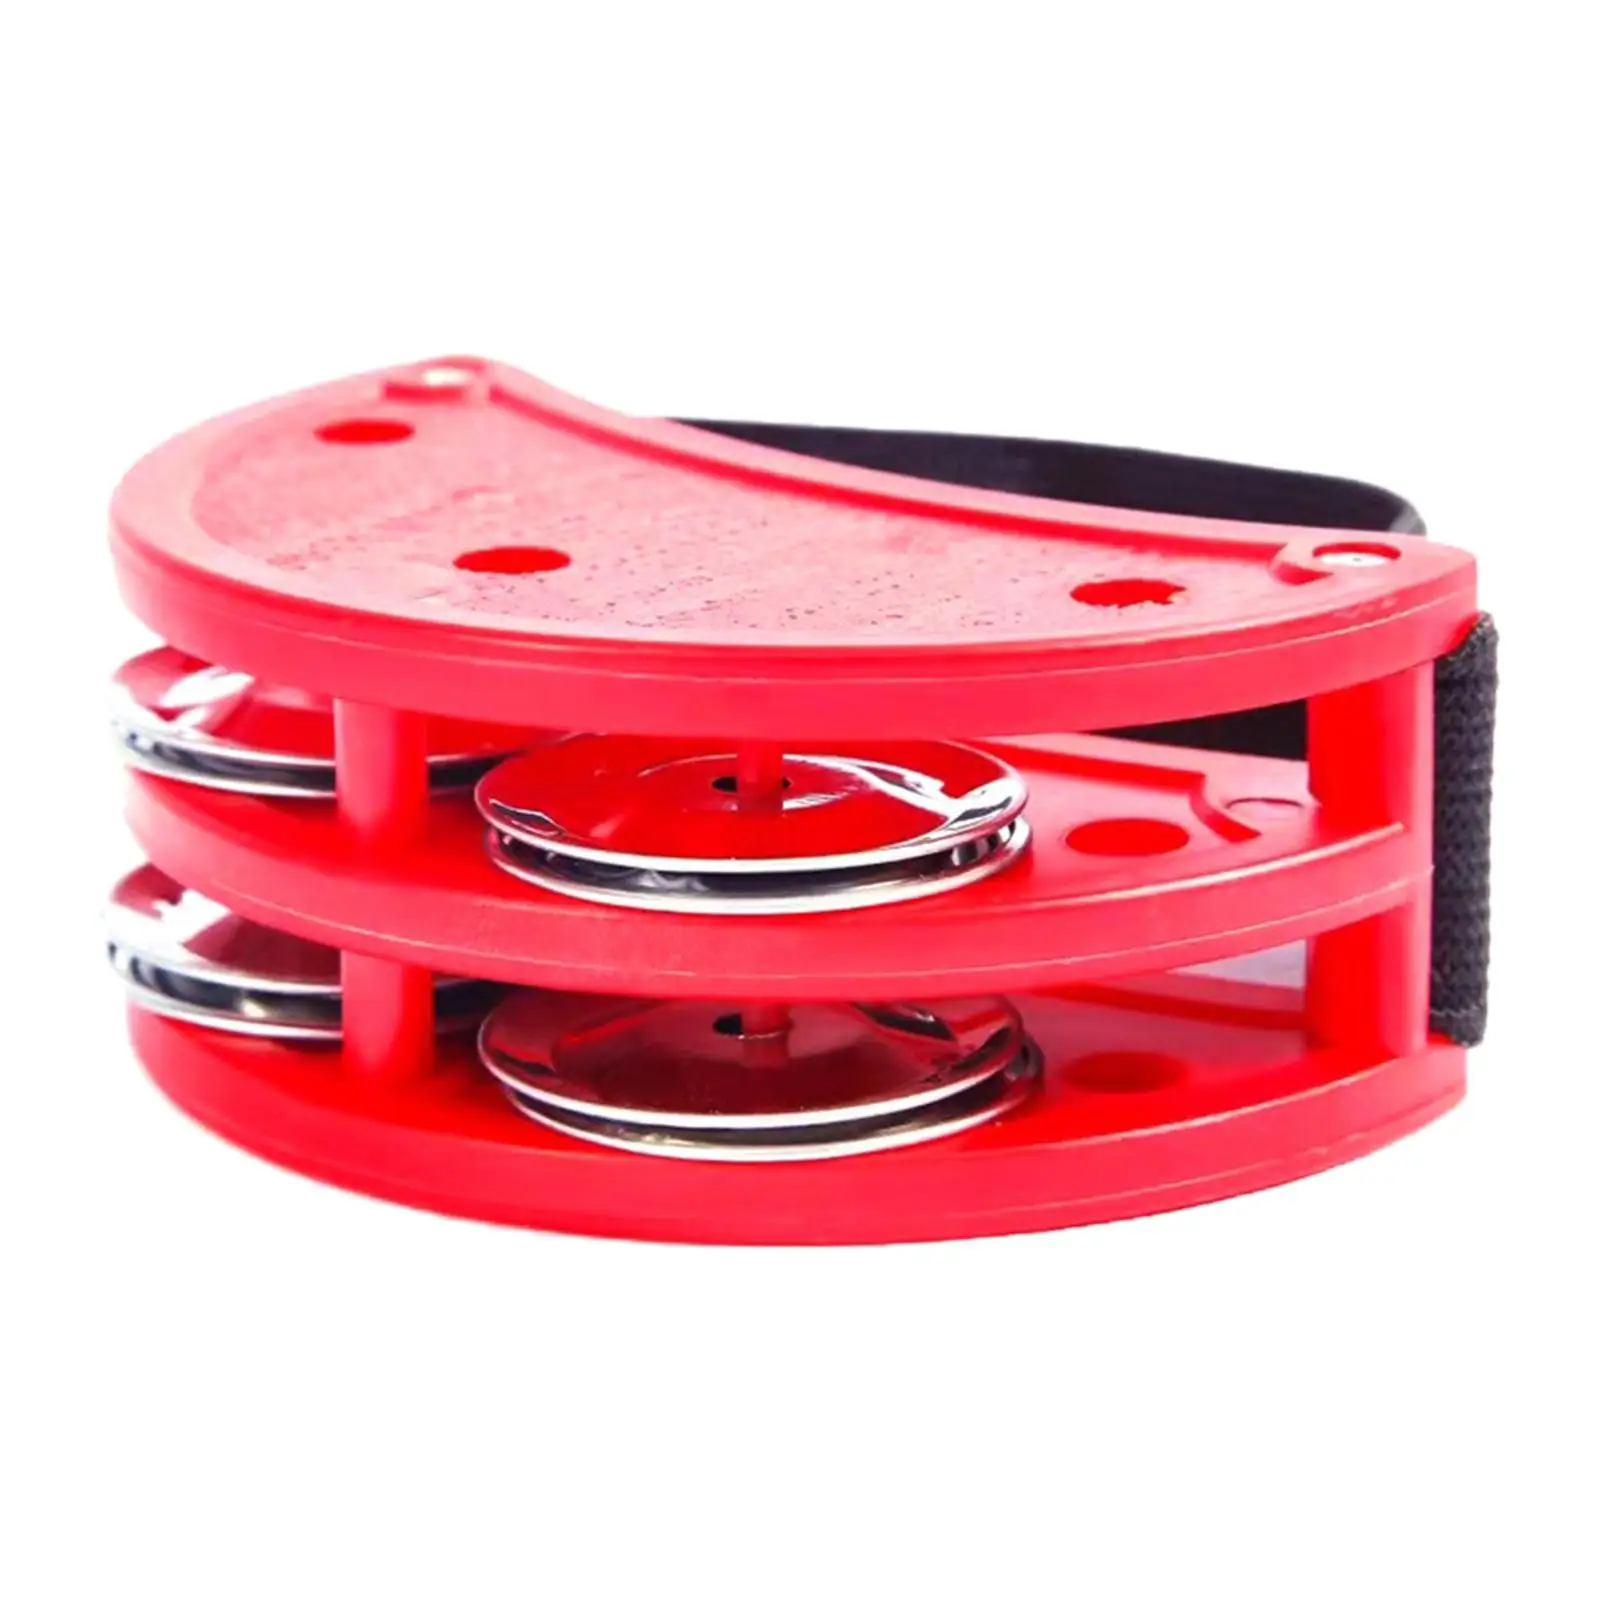 Foot Tambourine with Metal Bell Percussion Instruments for Parties